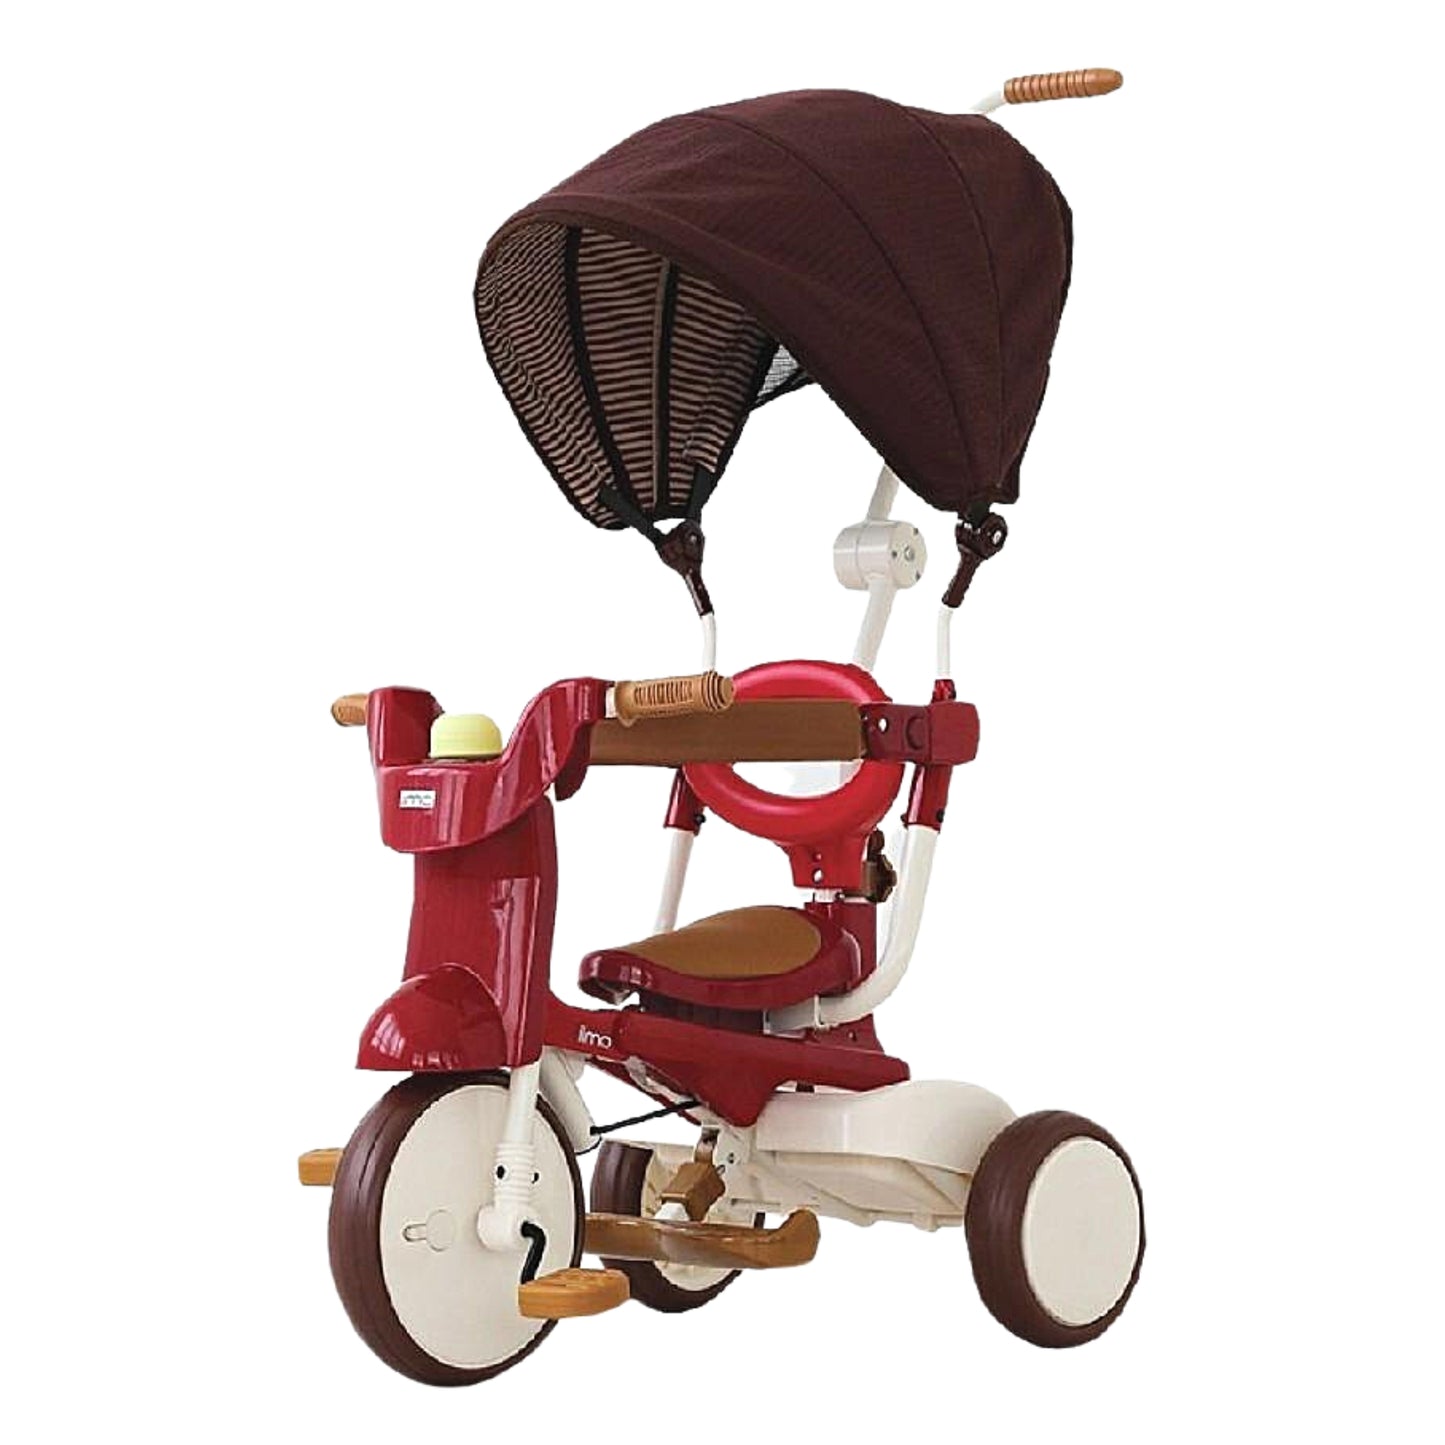 iimo 3-in-1 Foldable Upgraded Tricycle #2 Type SS with Canopy for Toddlers